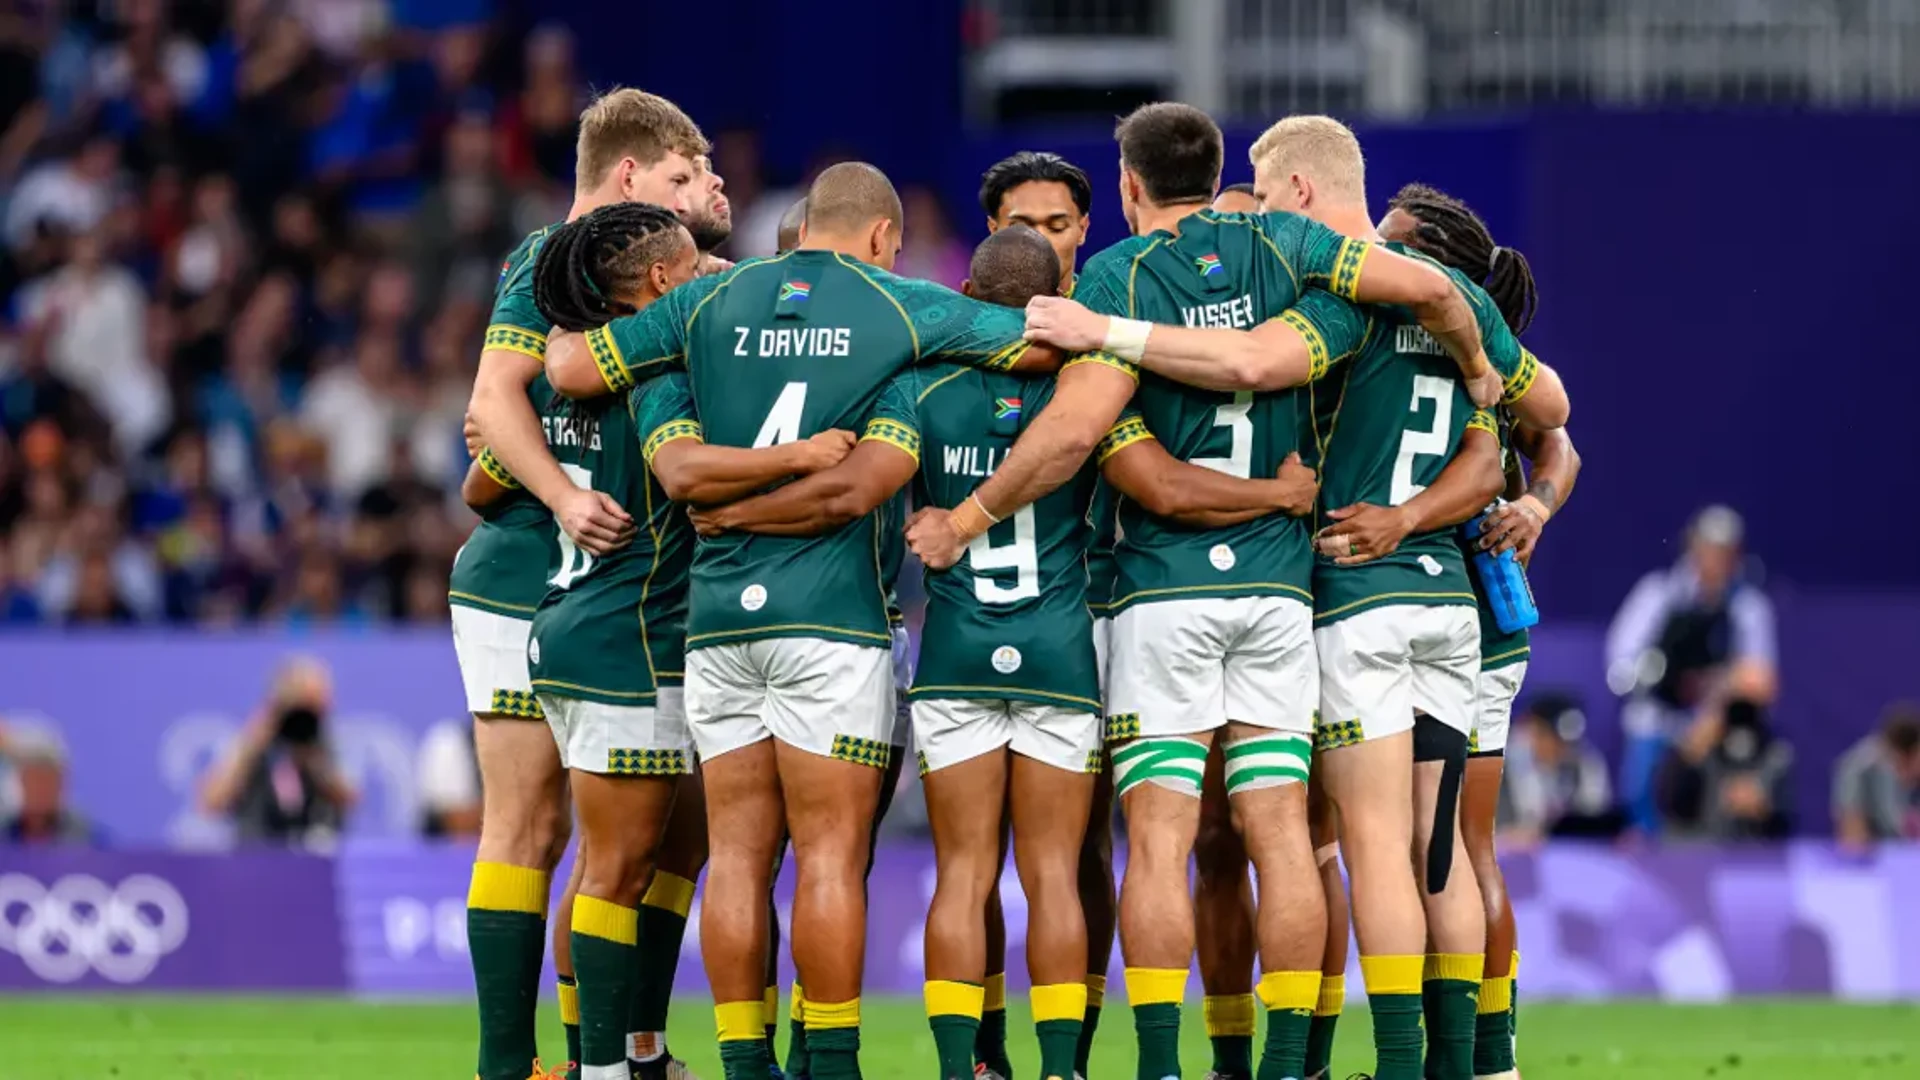 BELIEF: Partisanship and revenge: The Stade de France combination the Blitzboks need to overcome